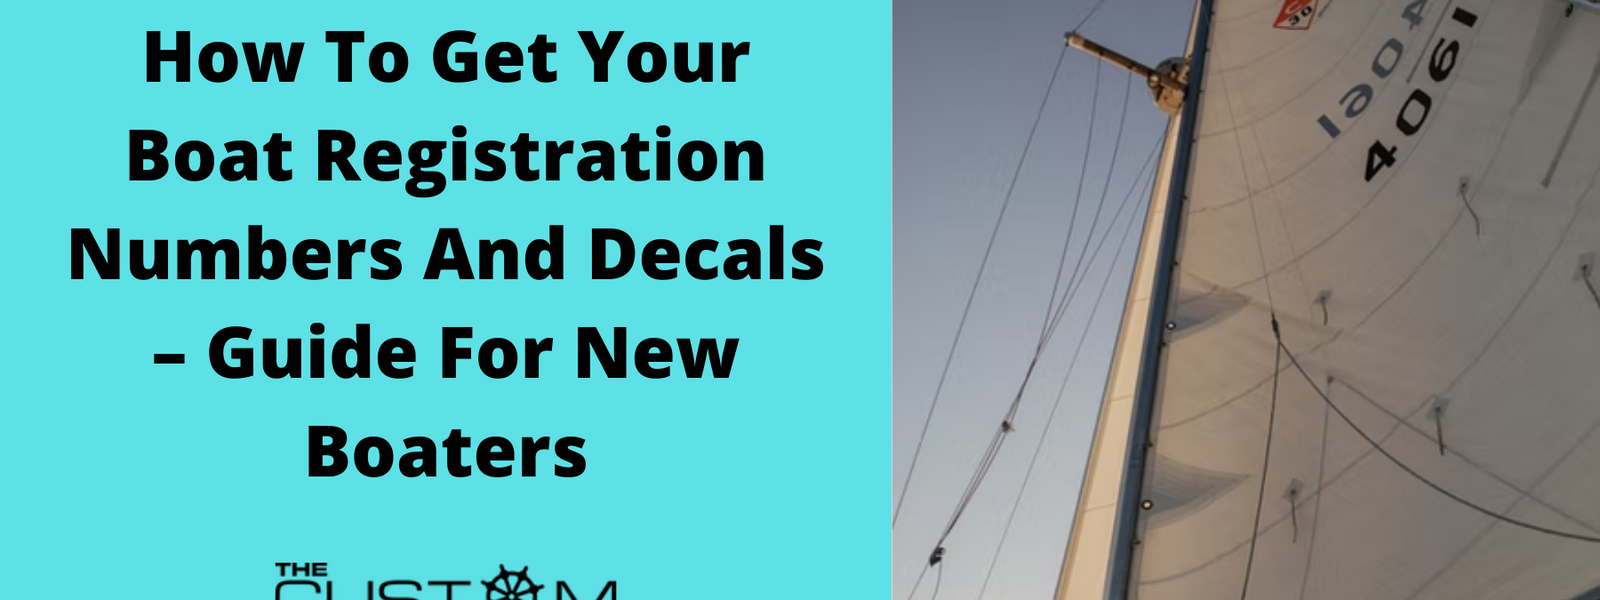 How To Get Your Boat Registration Numbers And Decals – Guide For New Boaters